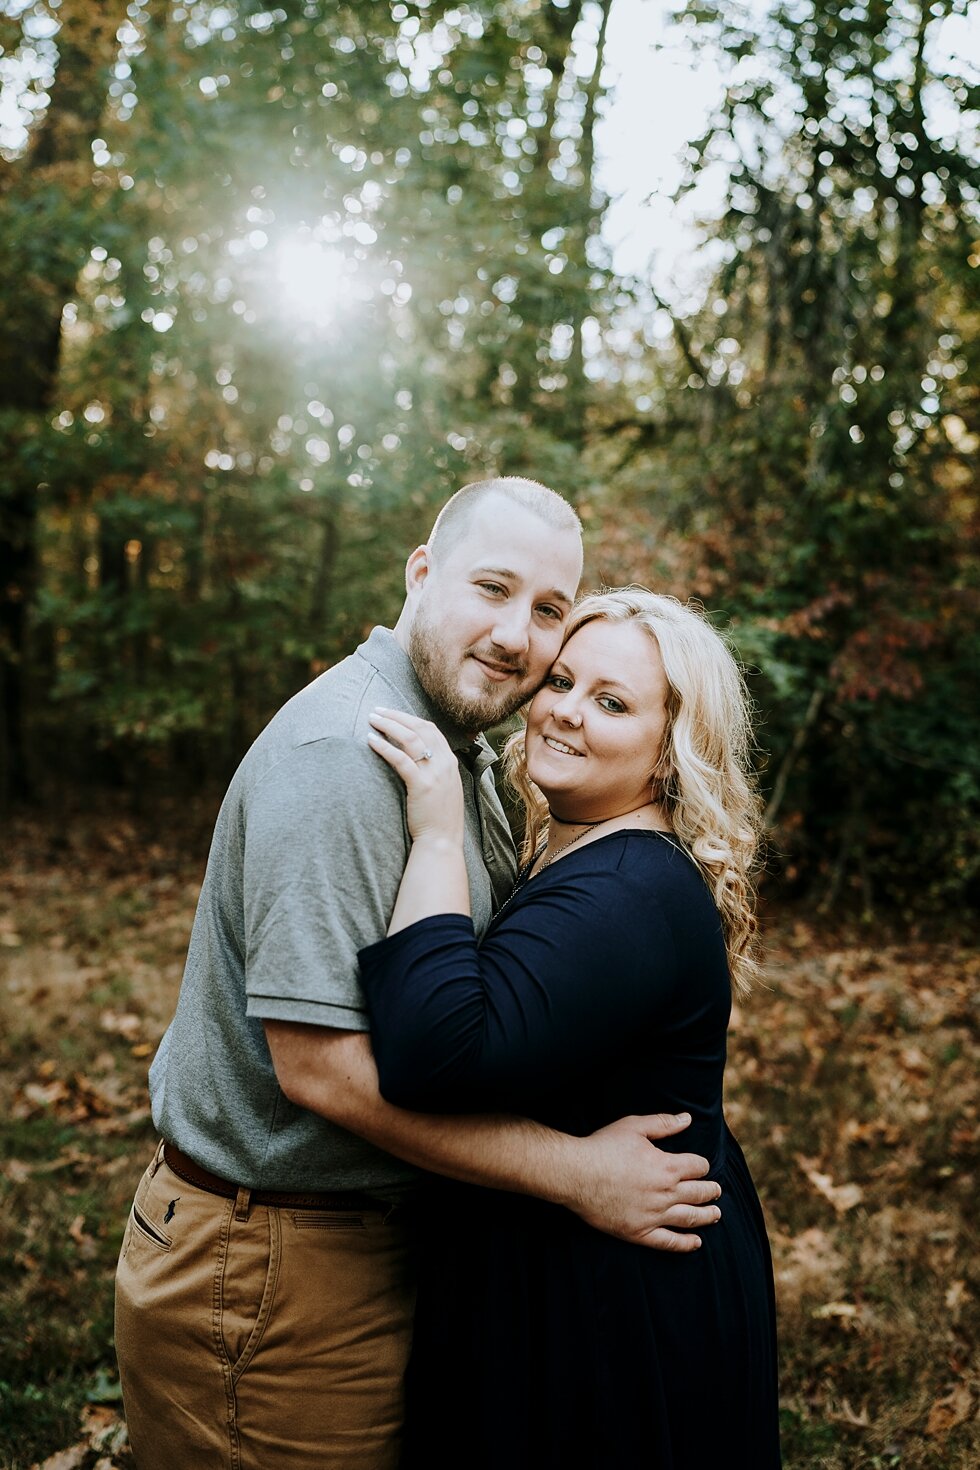  Sweet smiles with nothing but the setting sun and the forest trees behind them #engagementgoals #engagementphotographer #engaged #outdoorengagement #kentuckyphotographer #indianaphotographer #louisvillephotographer #engagementphotos #savethedatephot